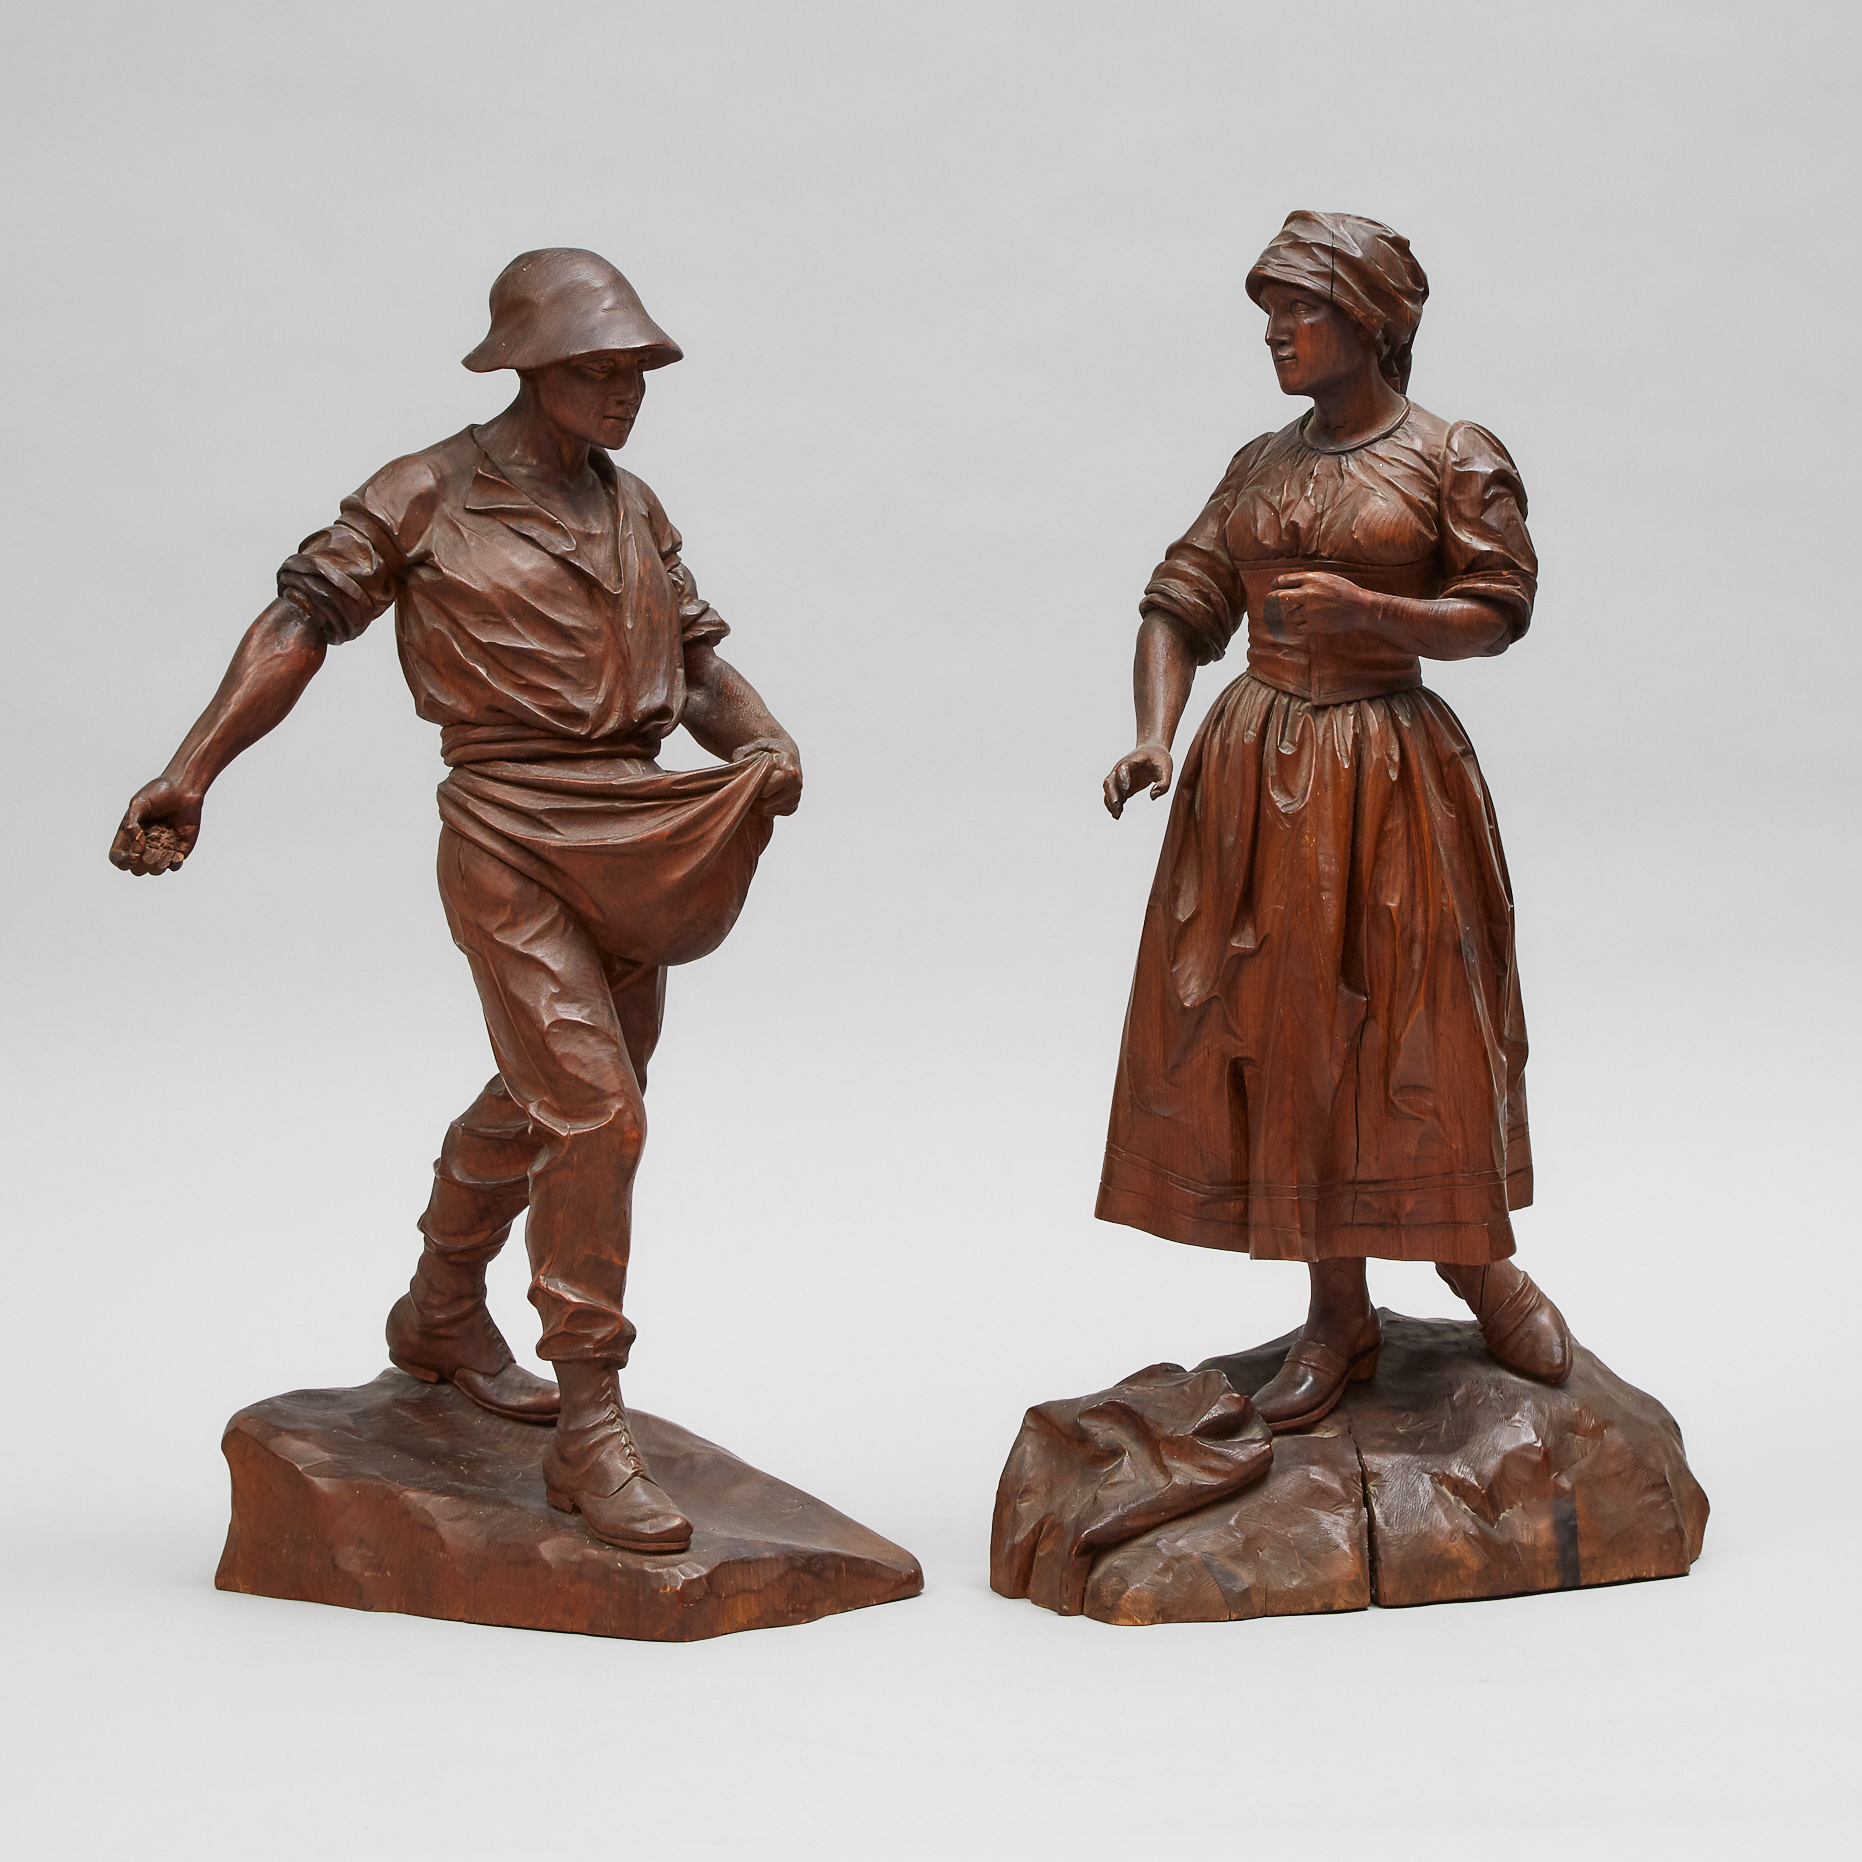 Pair of South German Carved Figures of a Peasant Couple, early 20th century